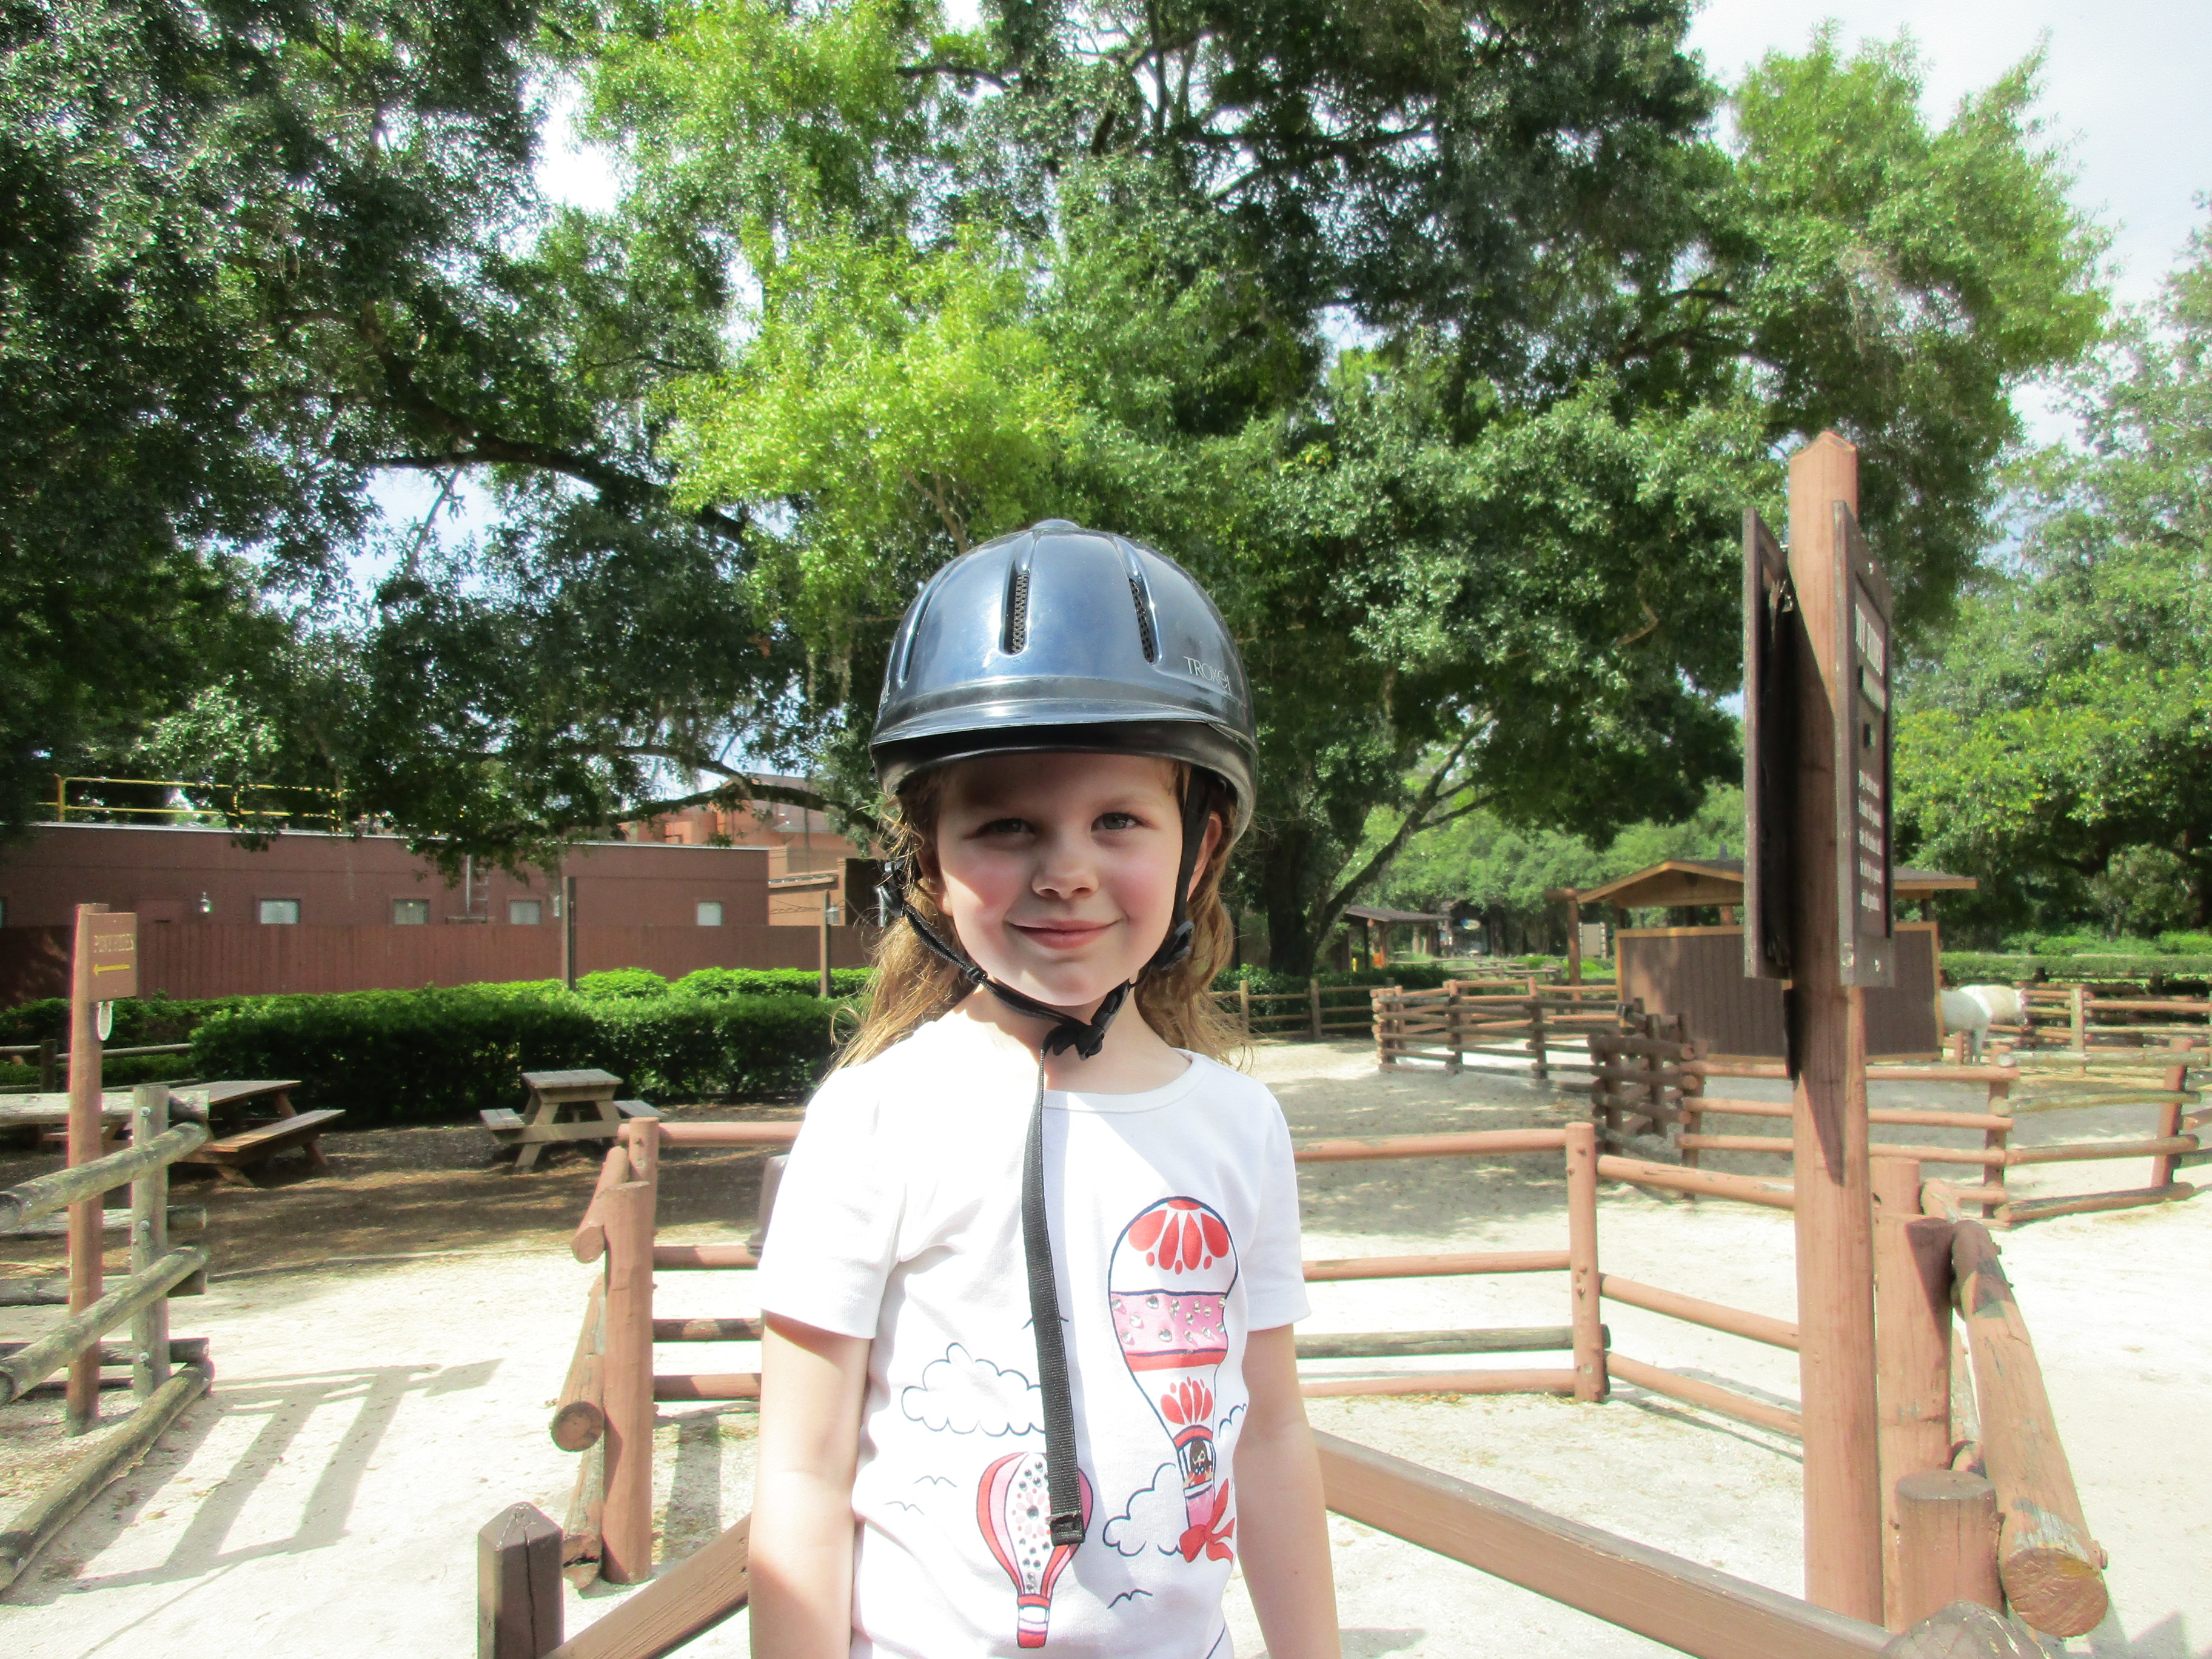 Saddle Up – Pony Rides at Disney’s Fort Wilderness